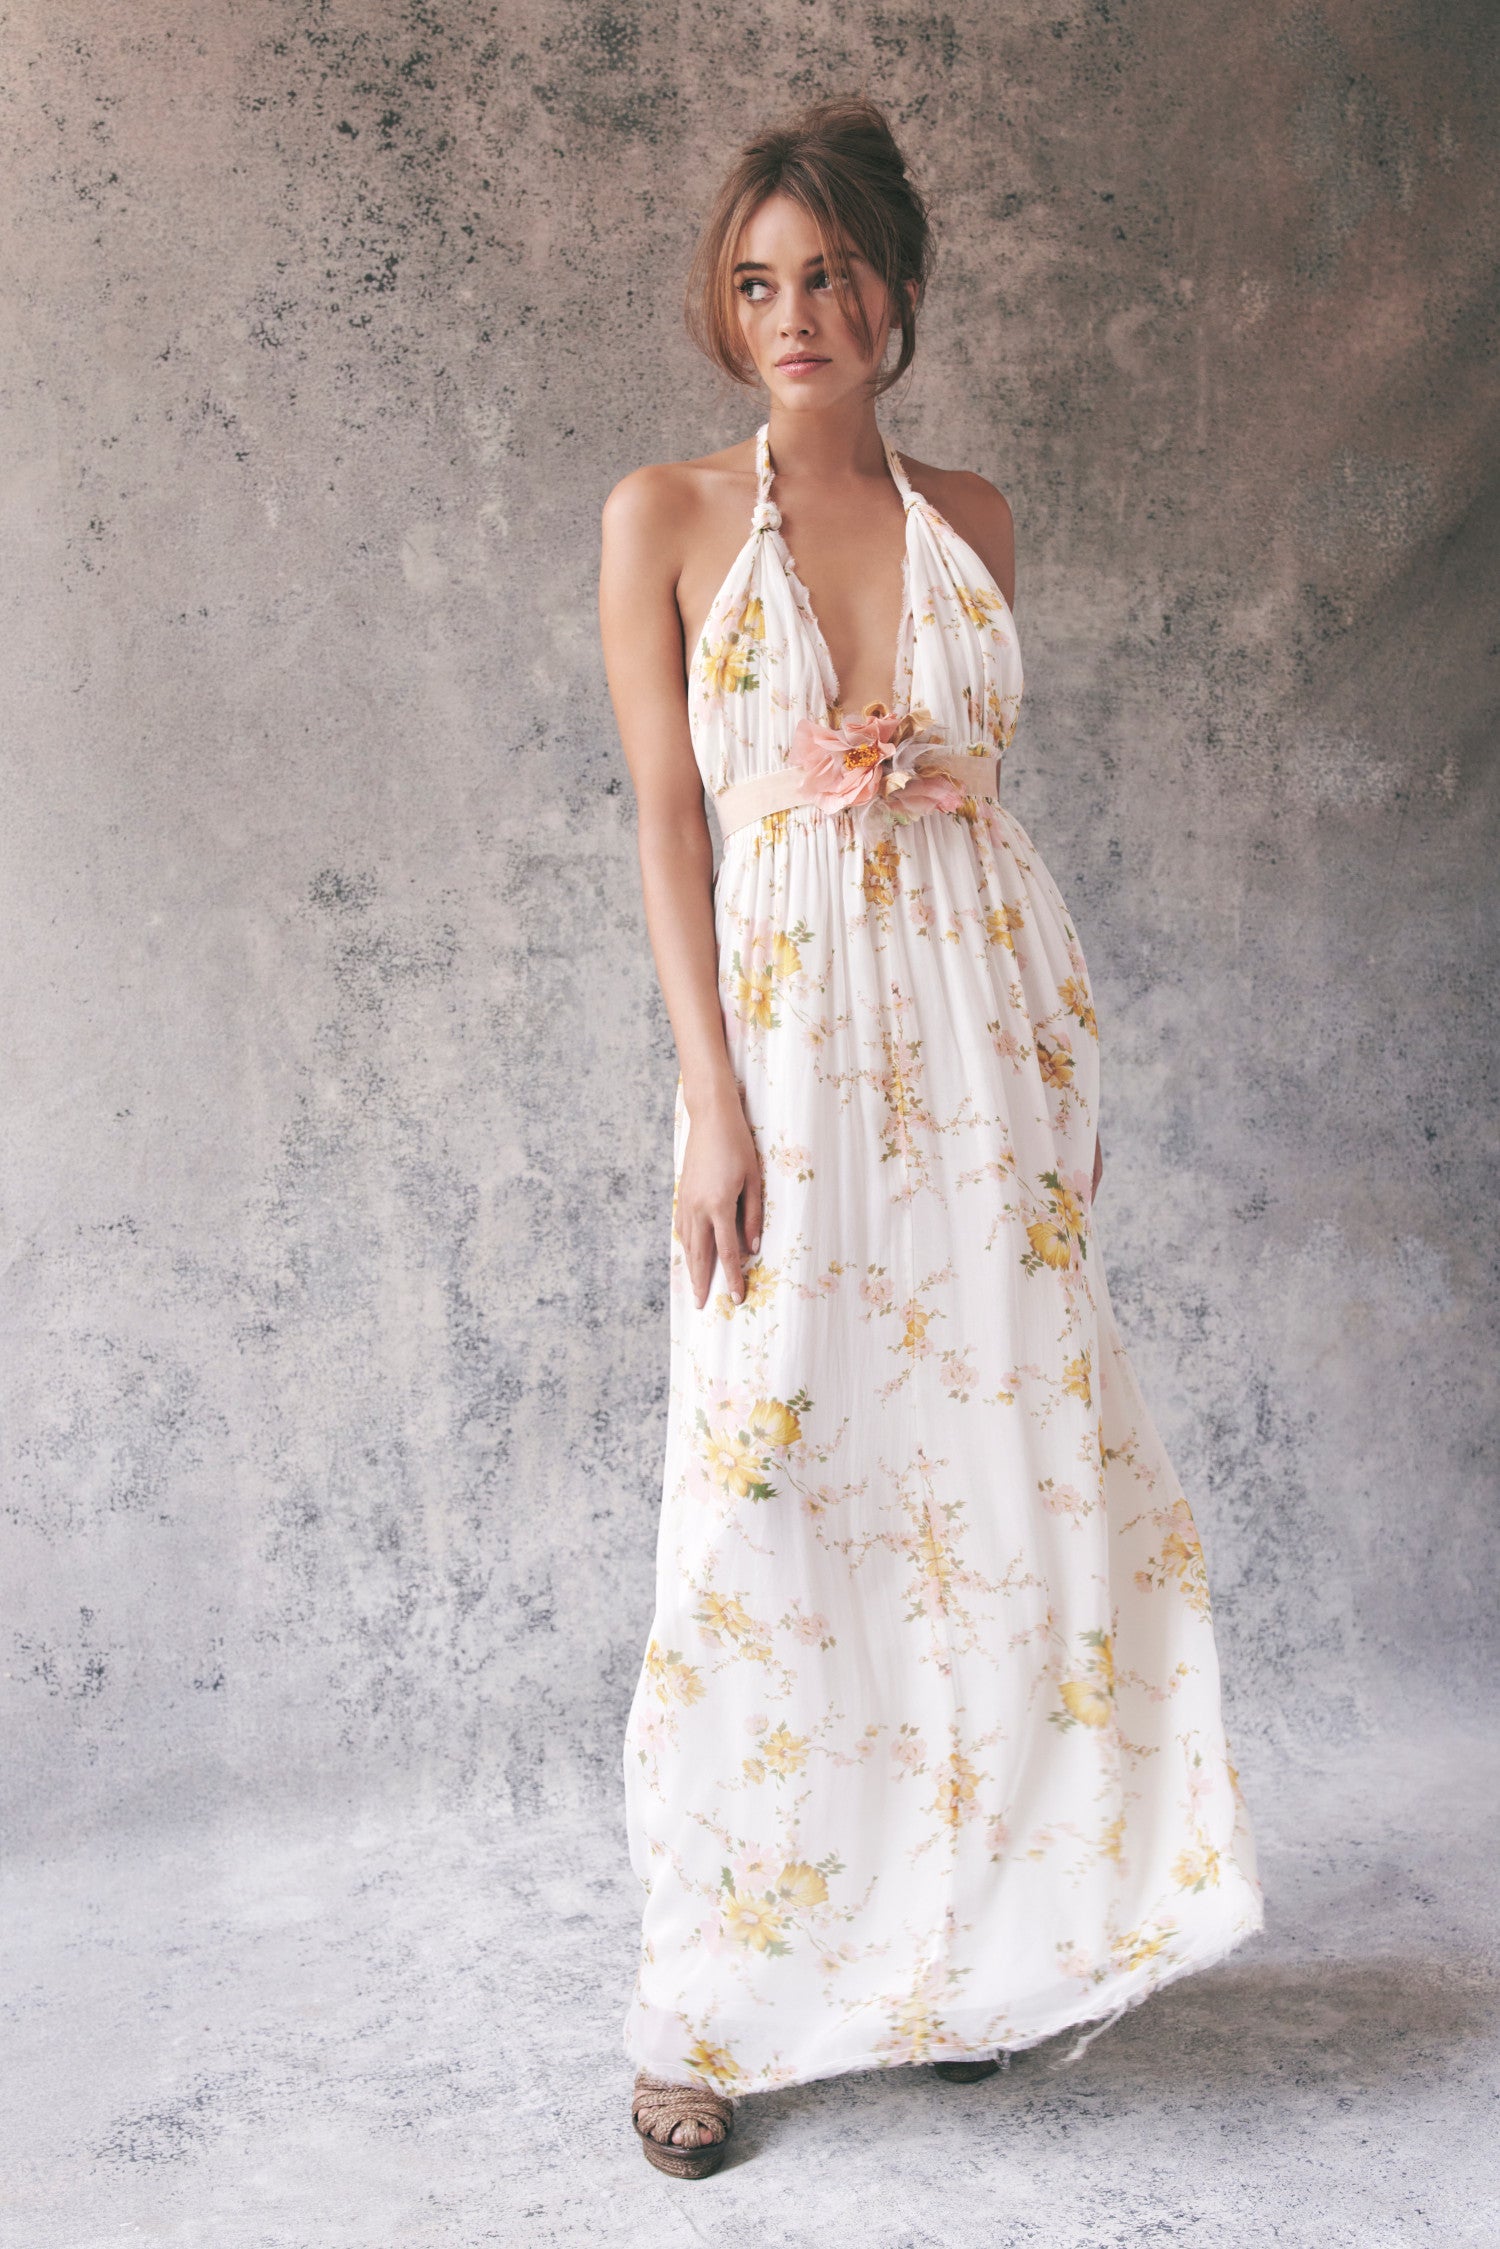 Model wearing white and yellow floral halter maxi dress